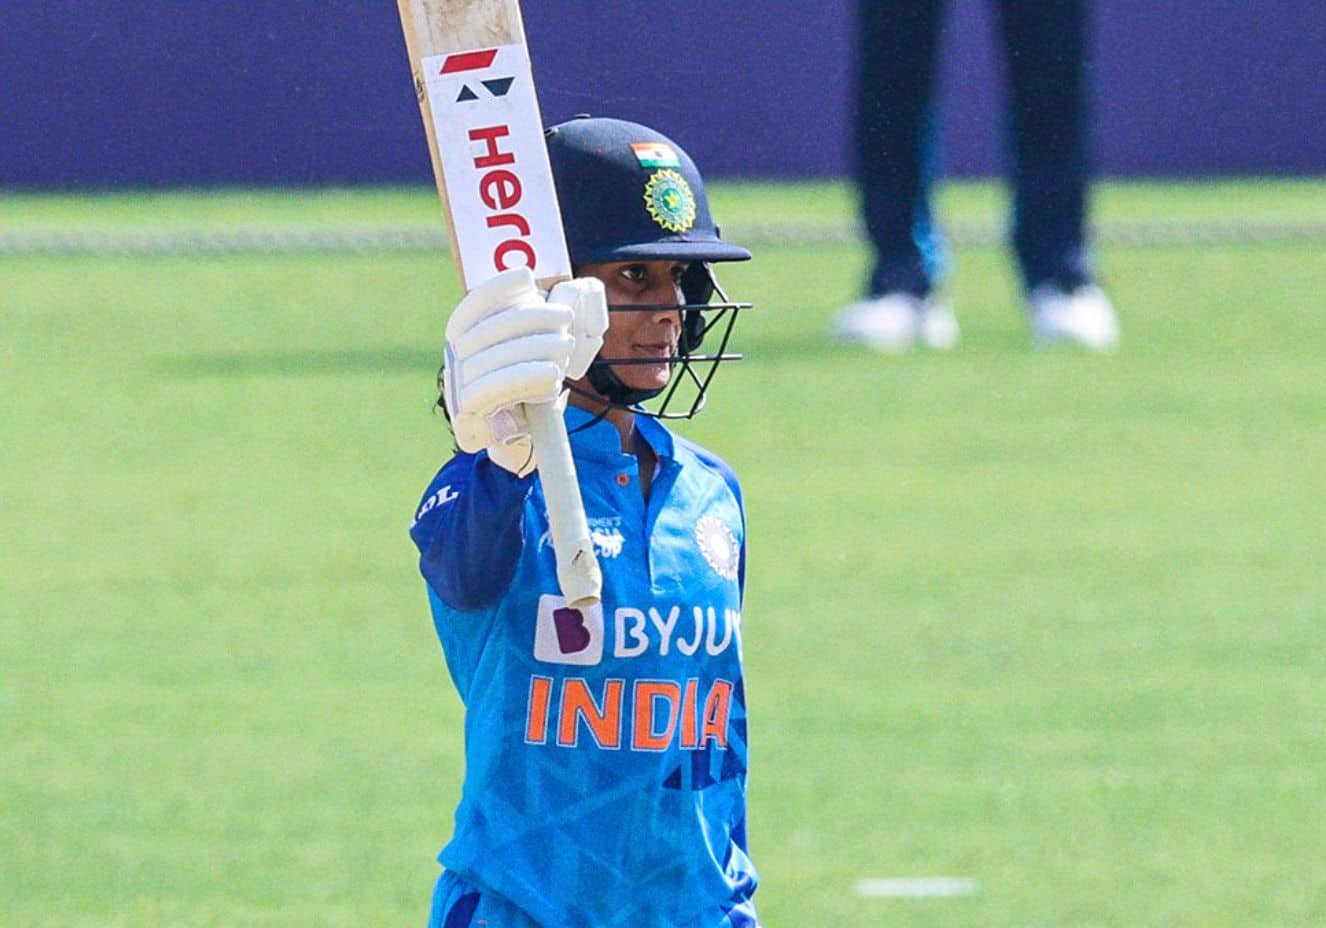 Developments in the ICC Women's T20I Player Rankings
